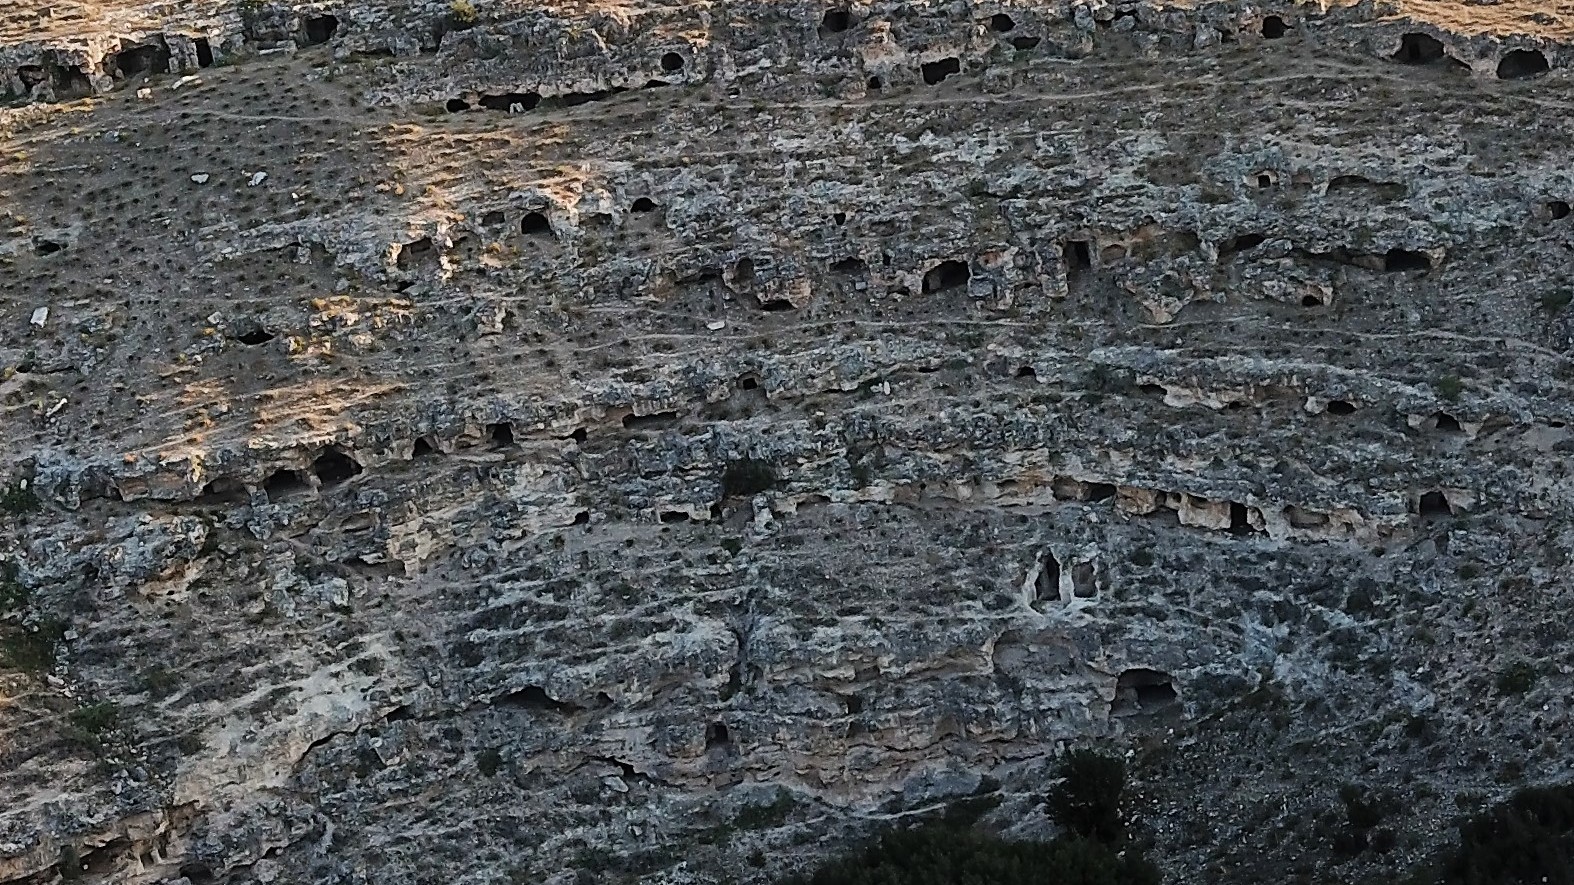 An aerial view of the stone-cut chamber tombs at the necropolis.